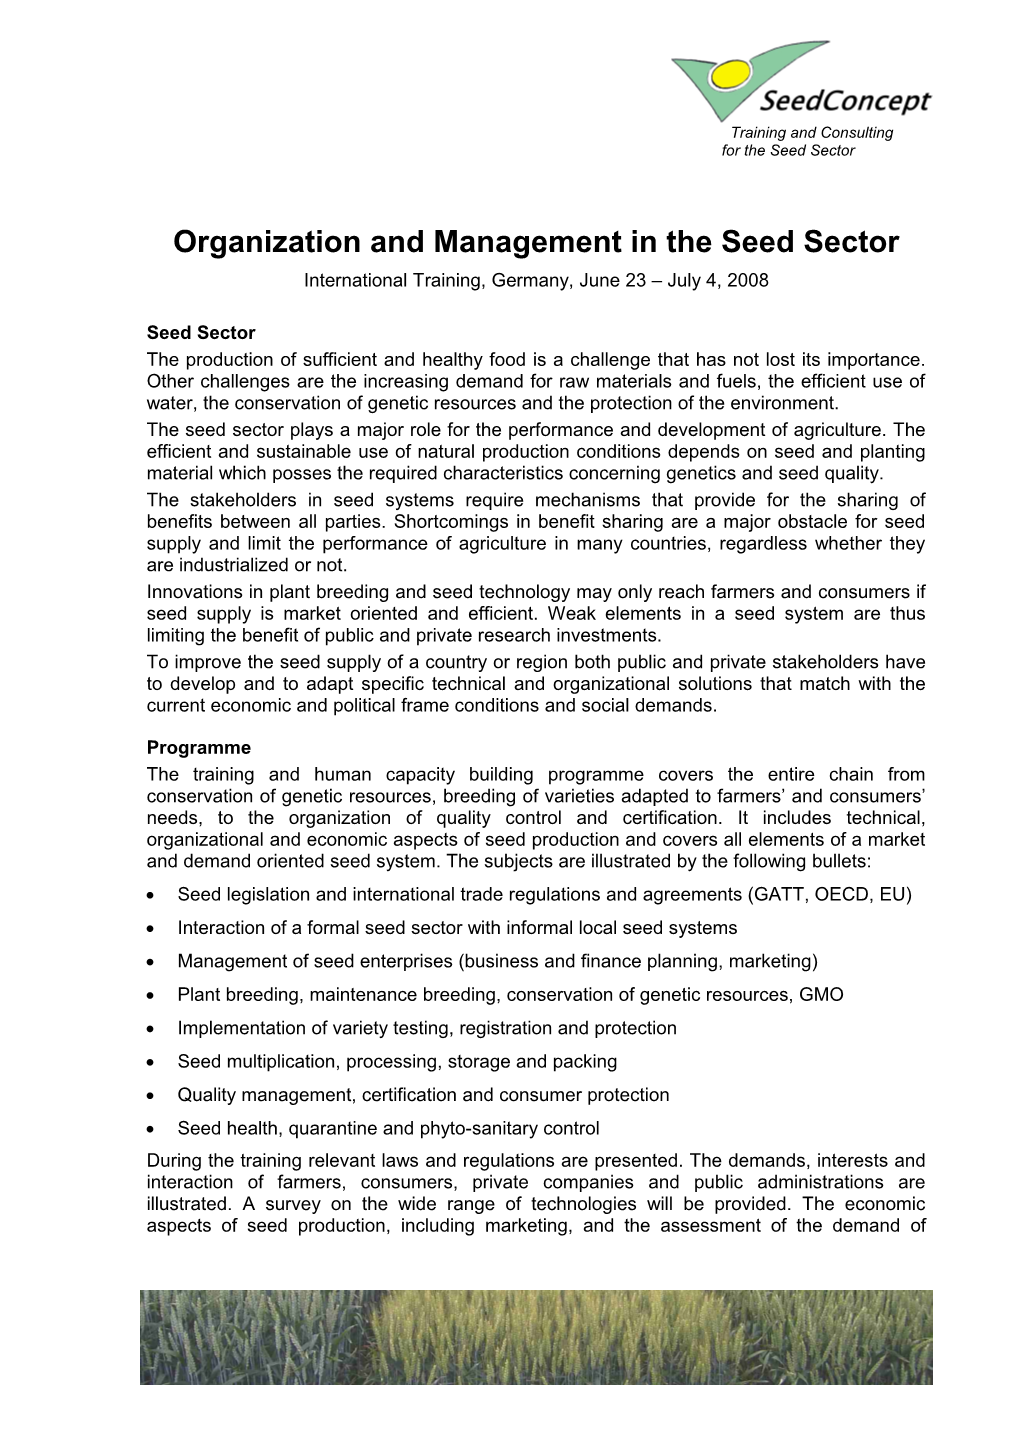 Organization and Management in the Seed Sector